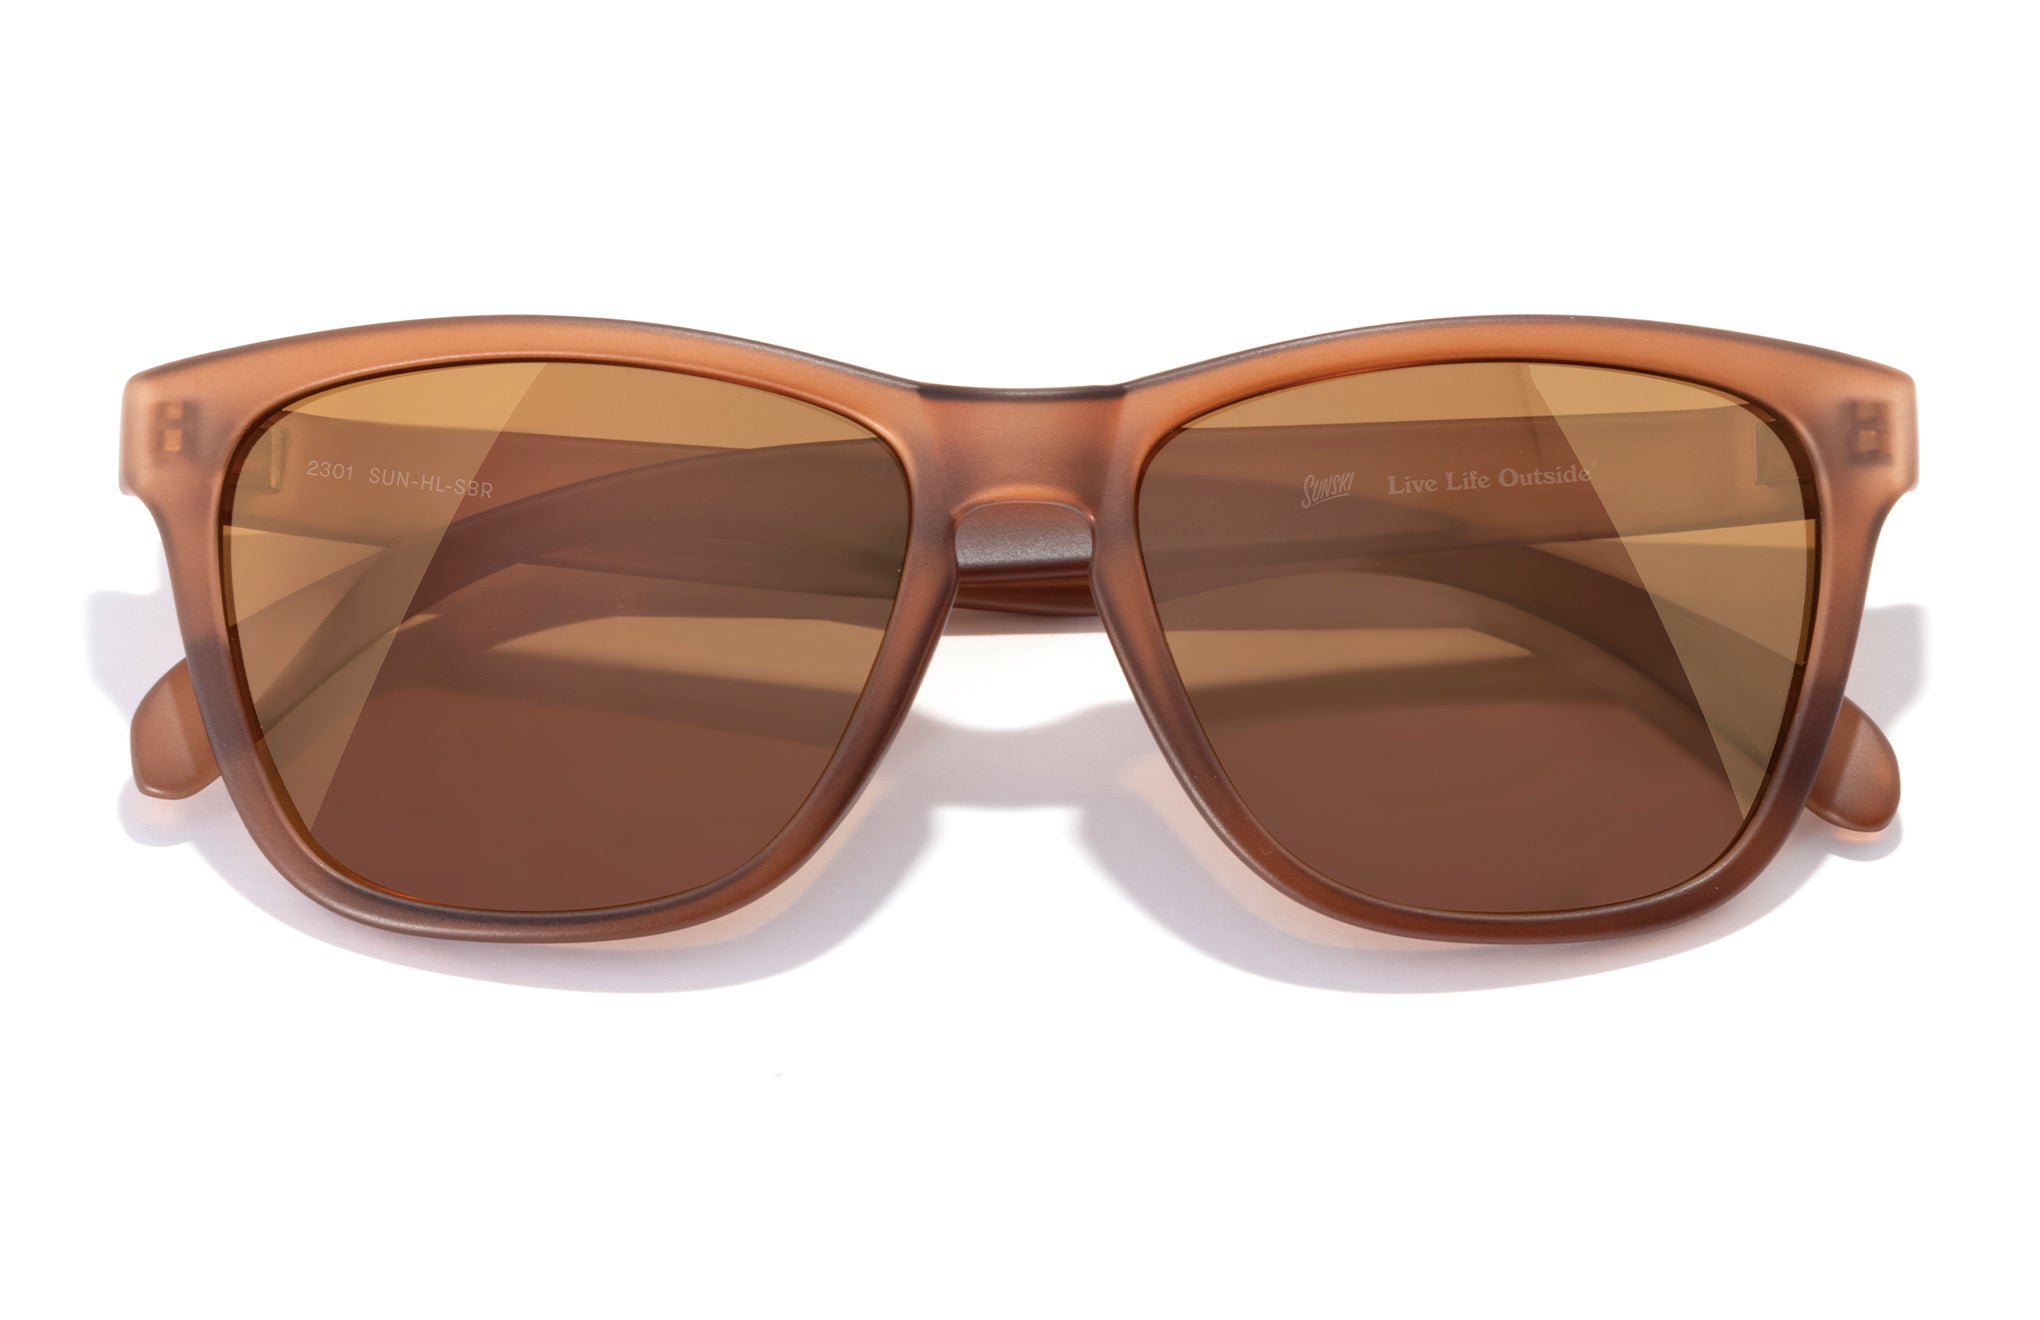 8 Best Sunglasses For Big Heads – Men's Aviators and More in 2023